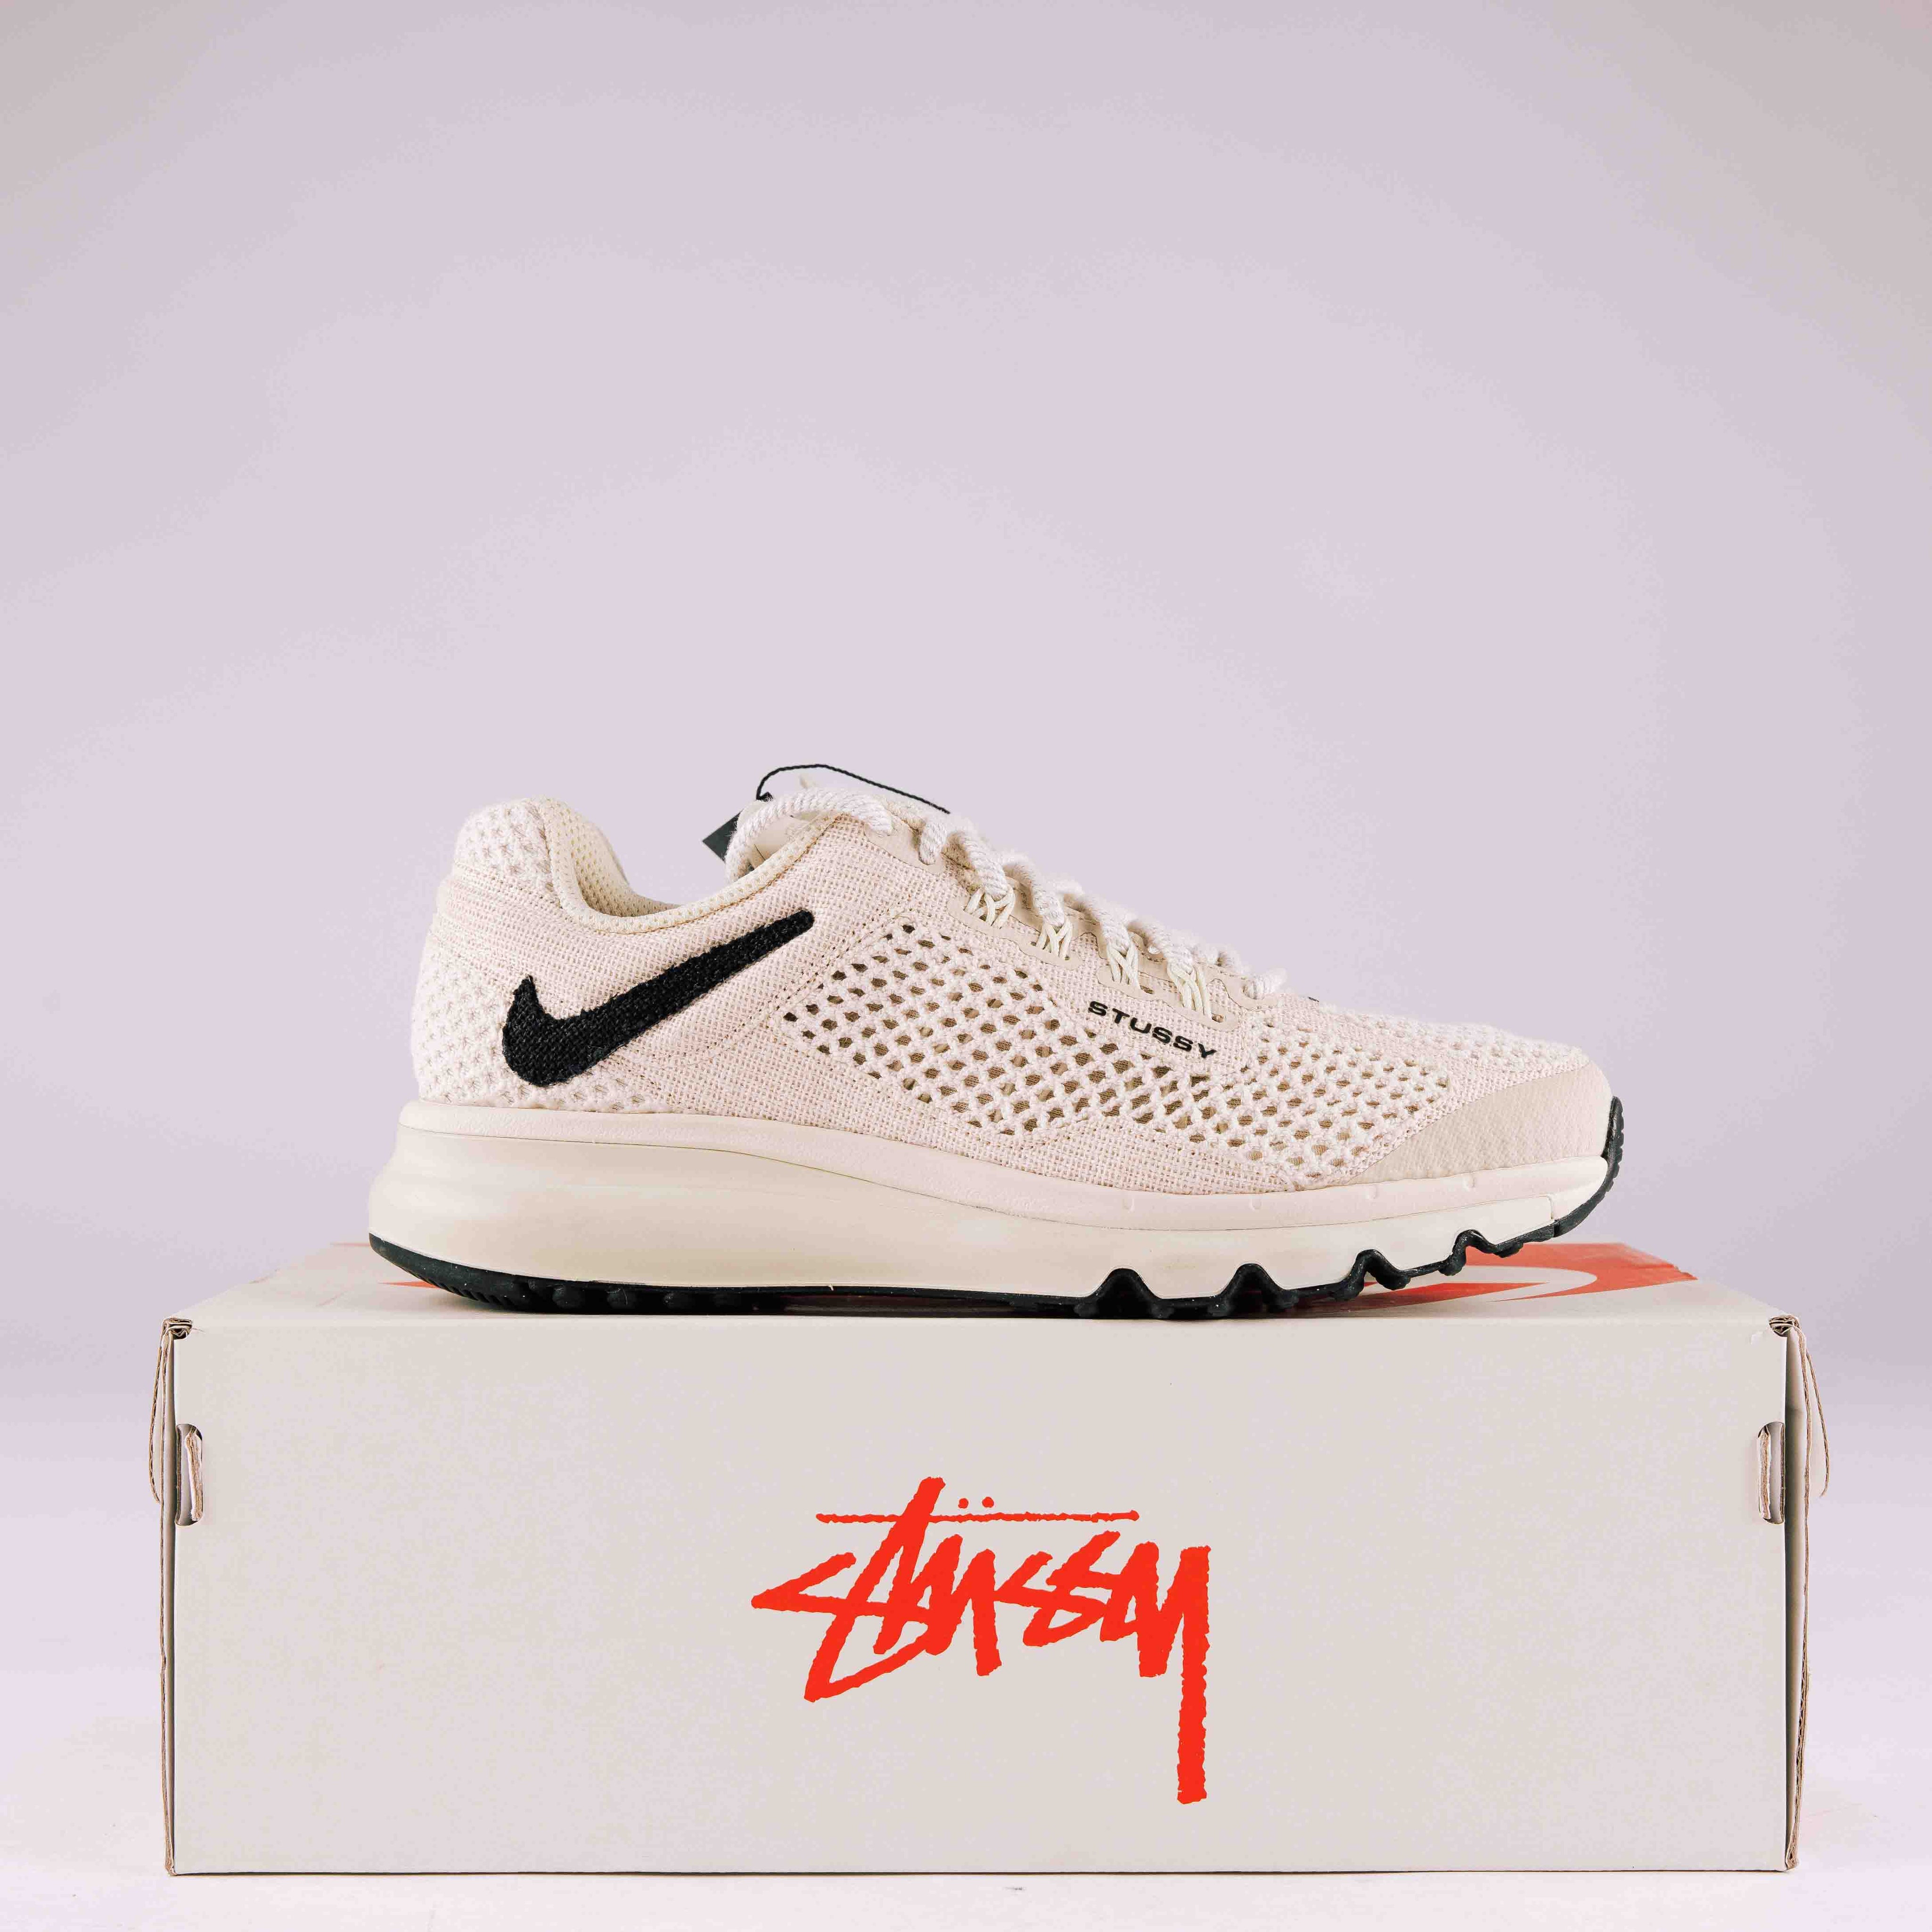 Nike Air Max 2013 Stussy Fossil (Used)